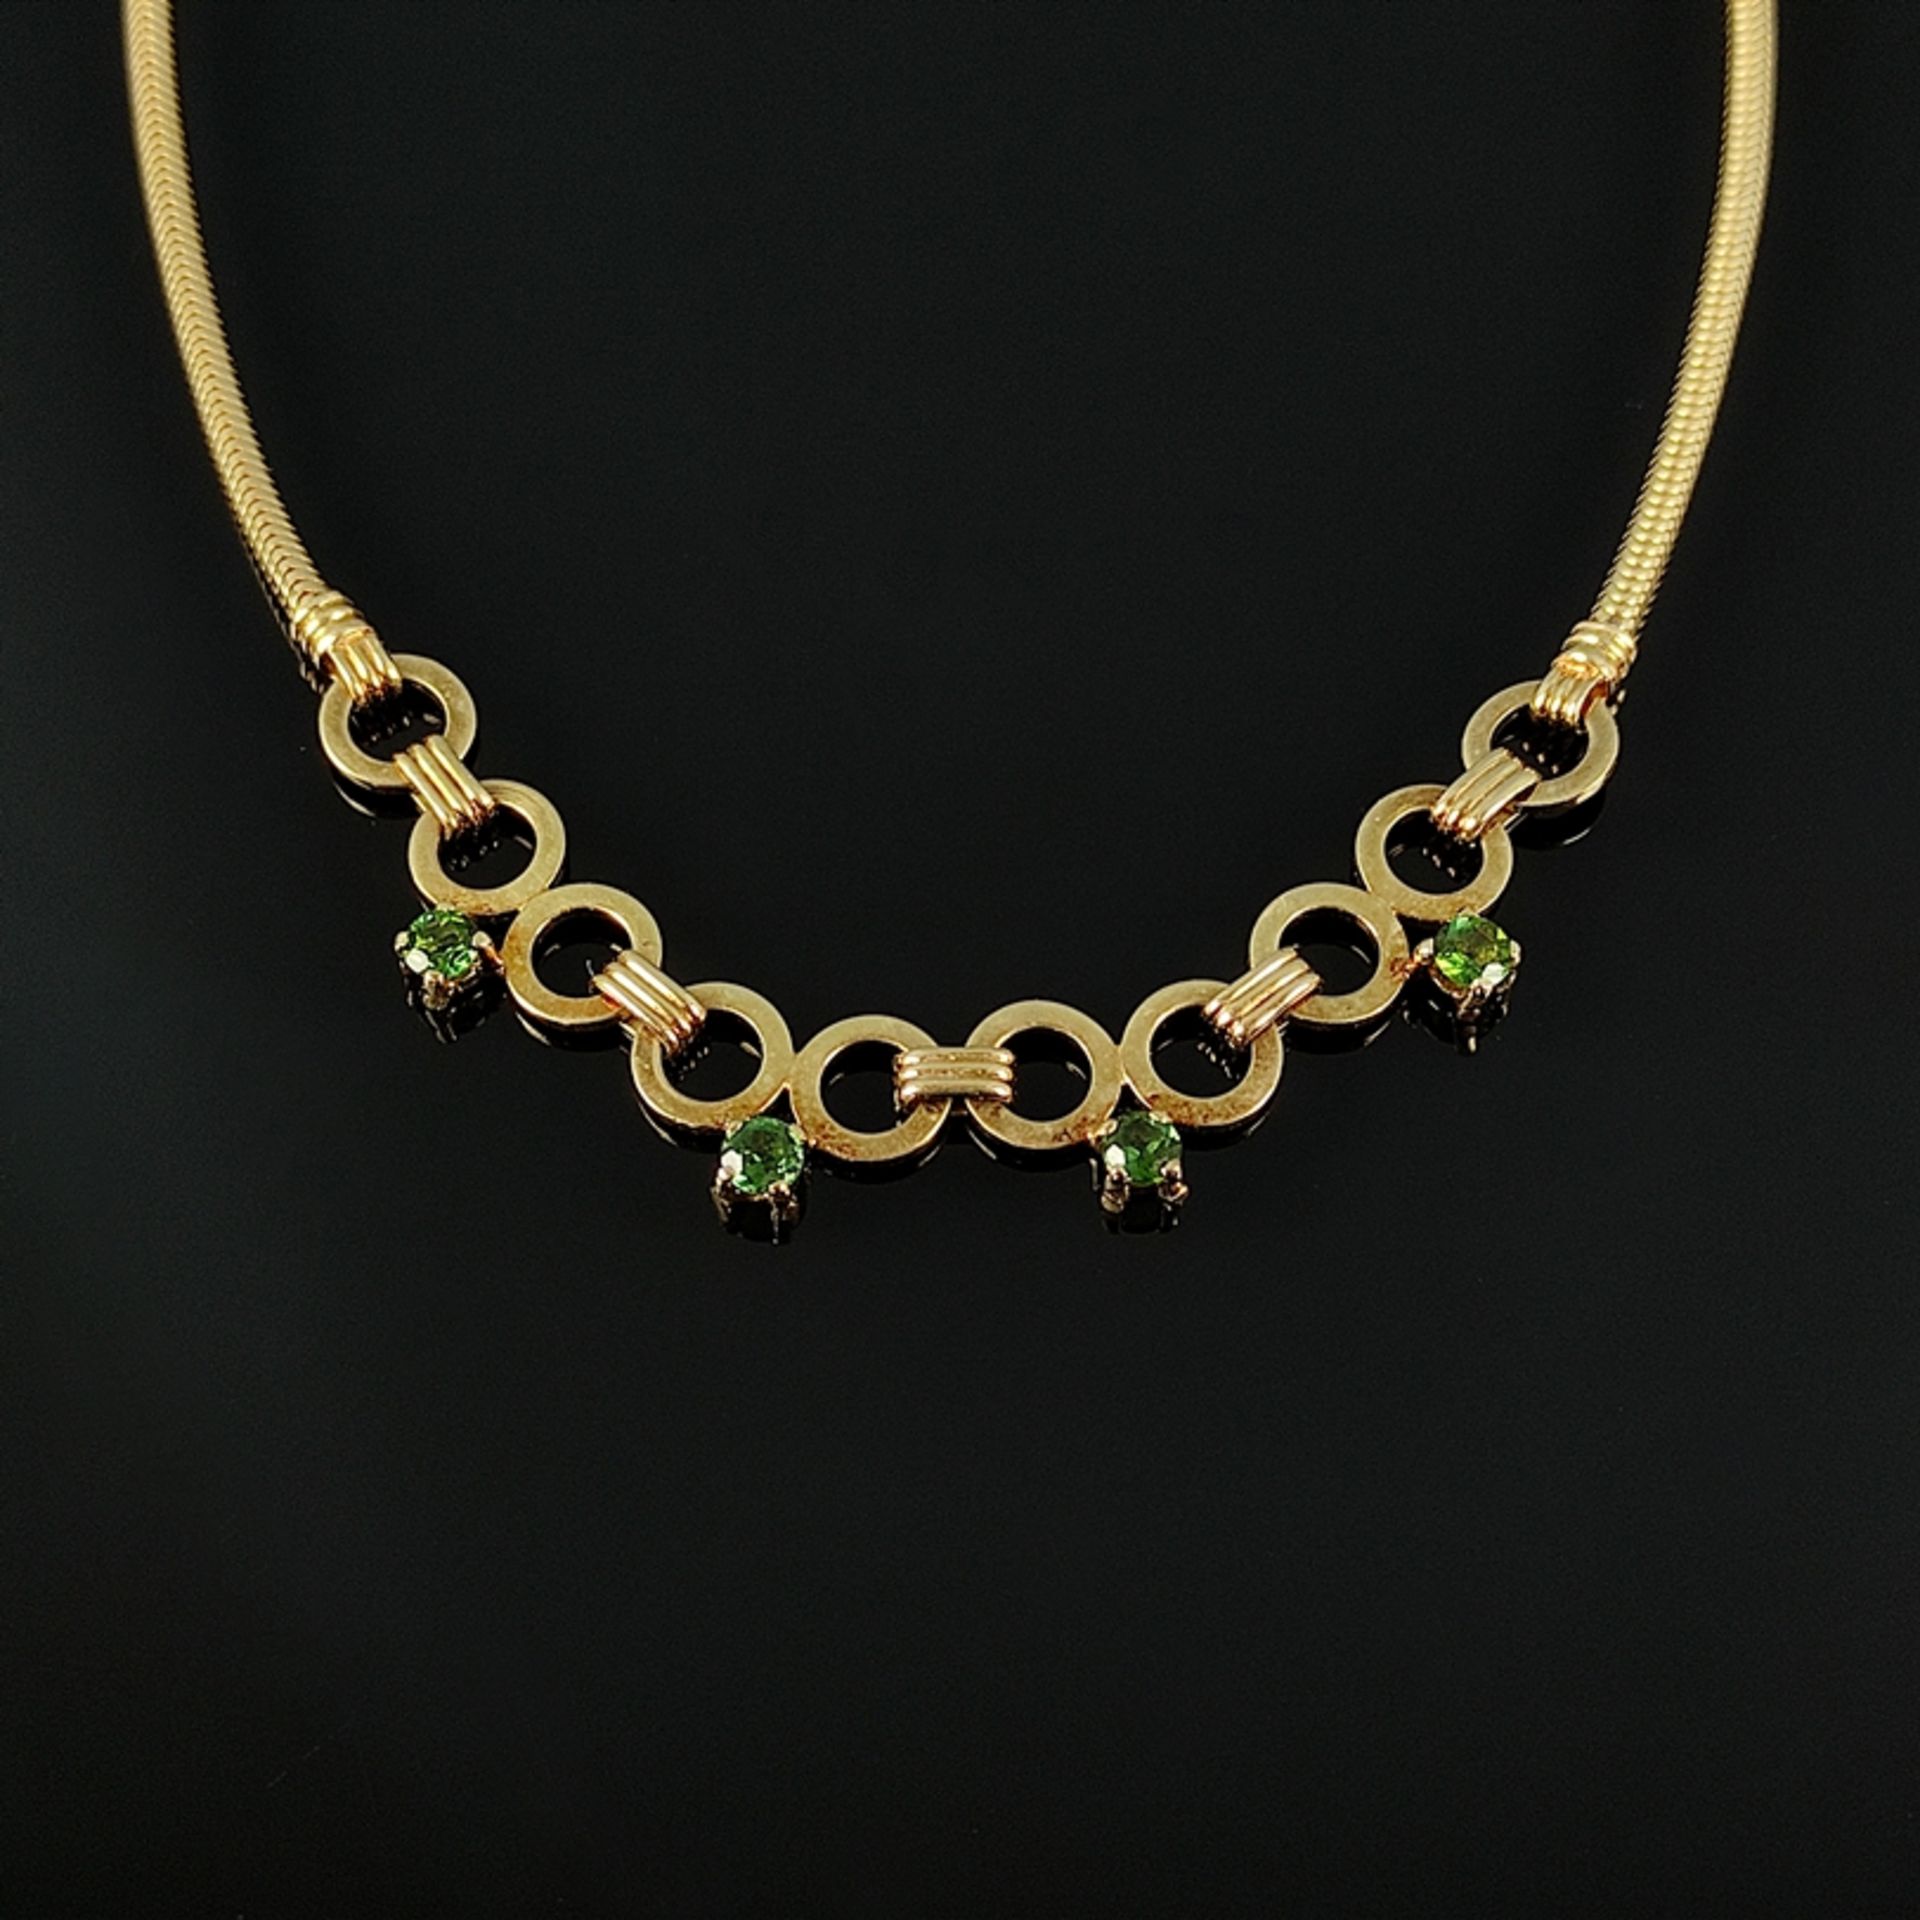 Fancy necklace with green tourmalines, 585/14K yellow gold, 24,9g, middle part worked of round elem